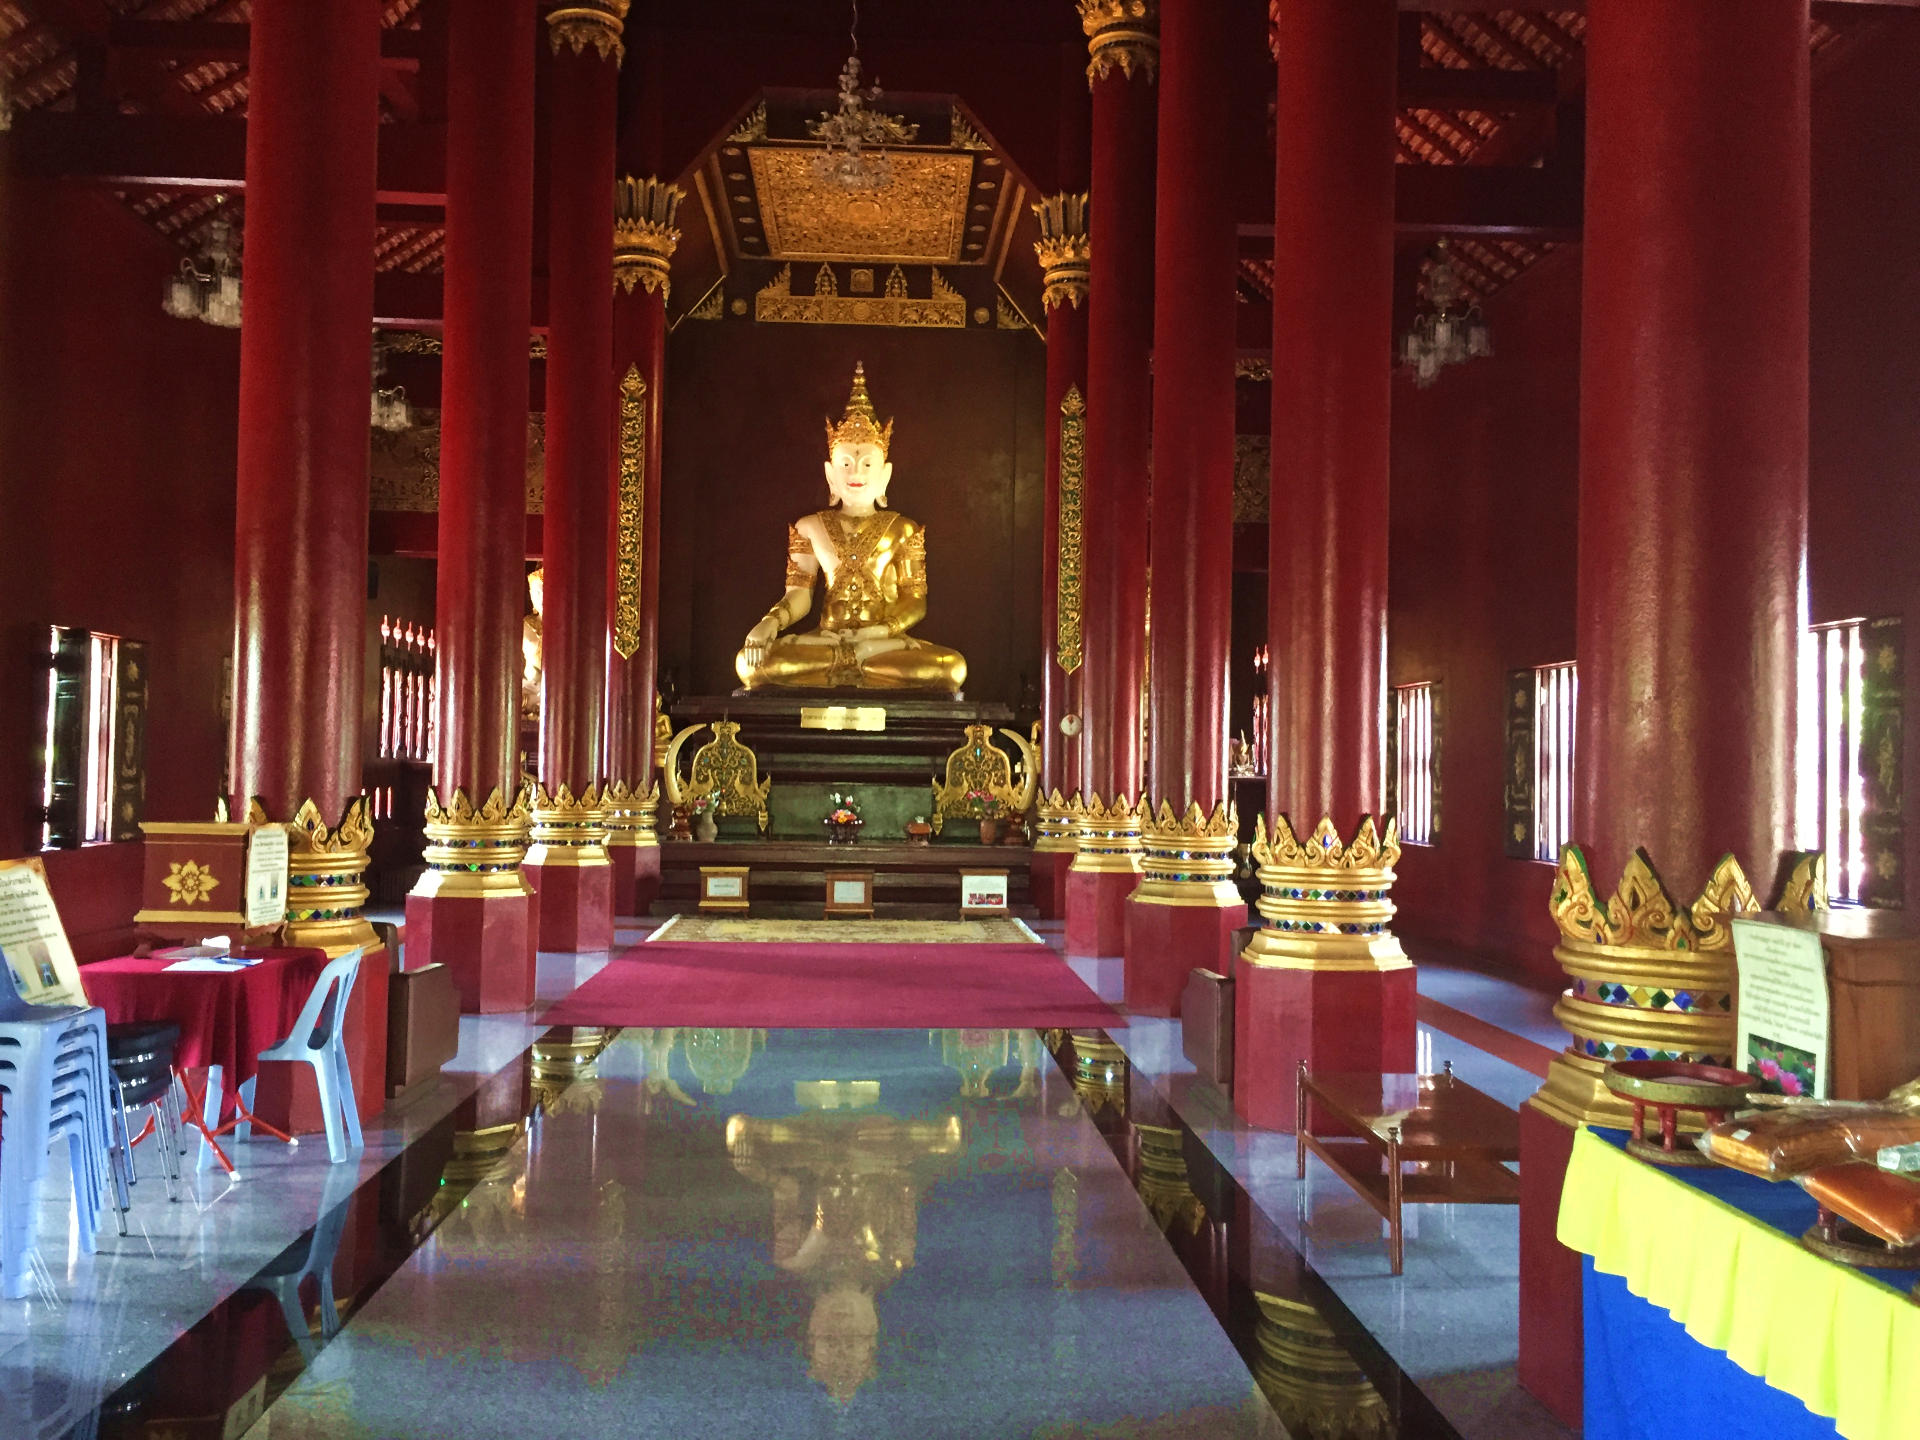 The interior of Wat Monthian in Chiang Mai, Thailand